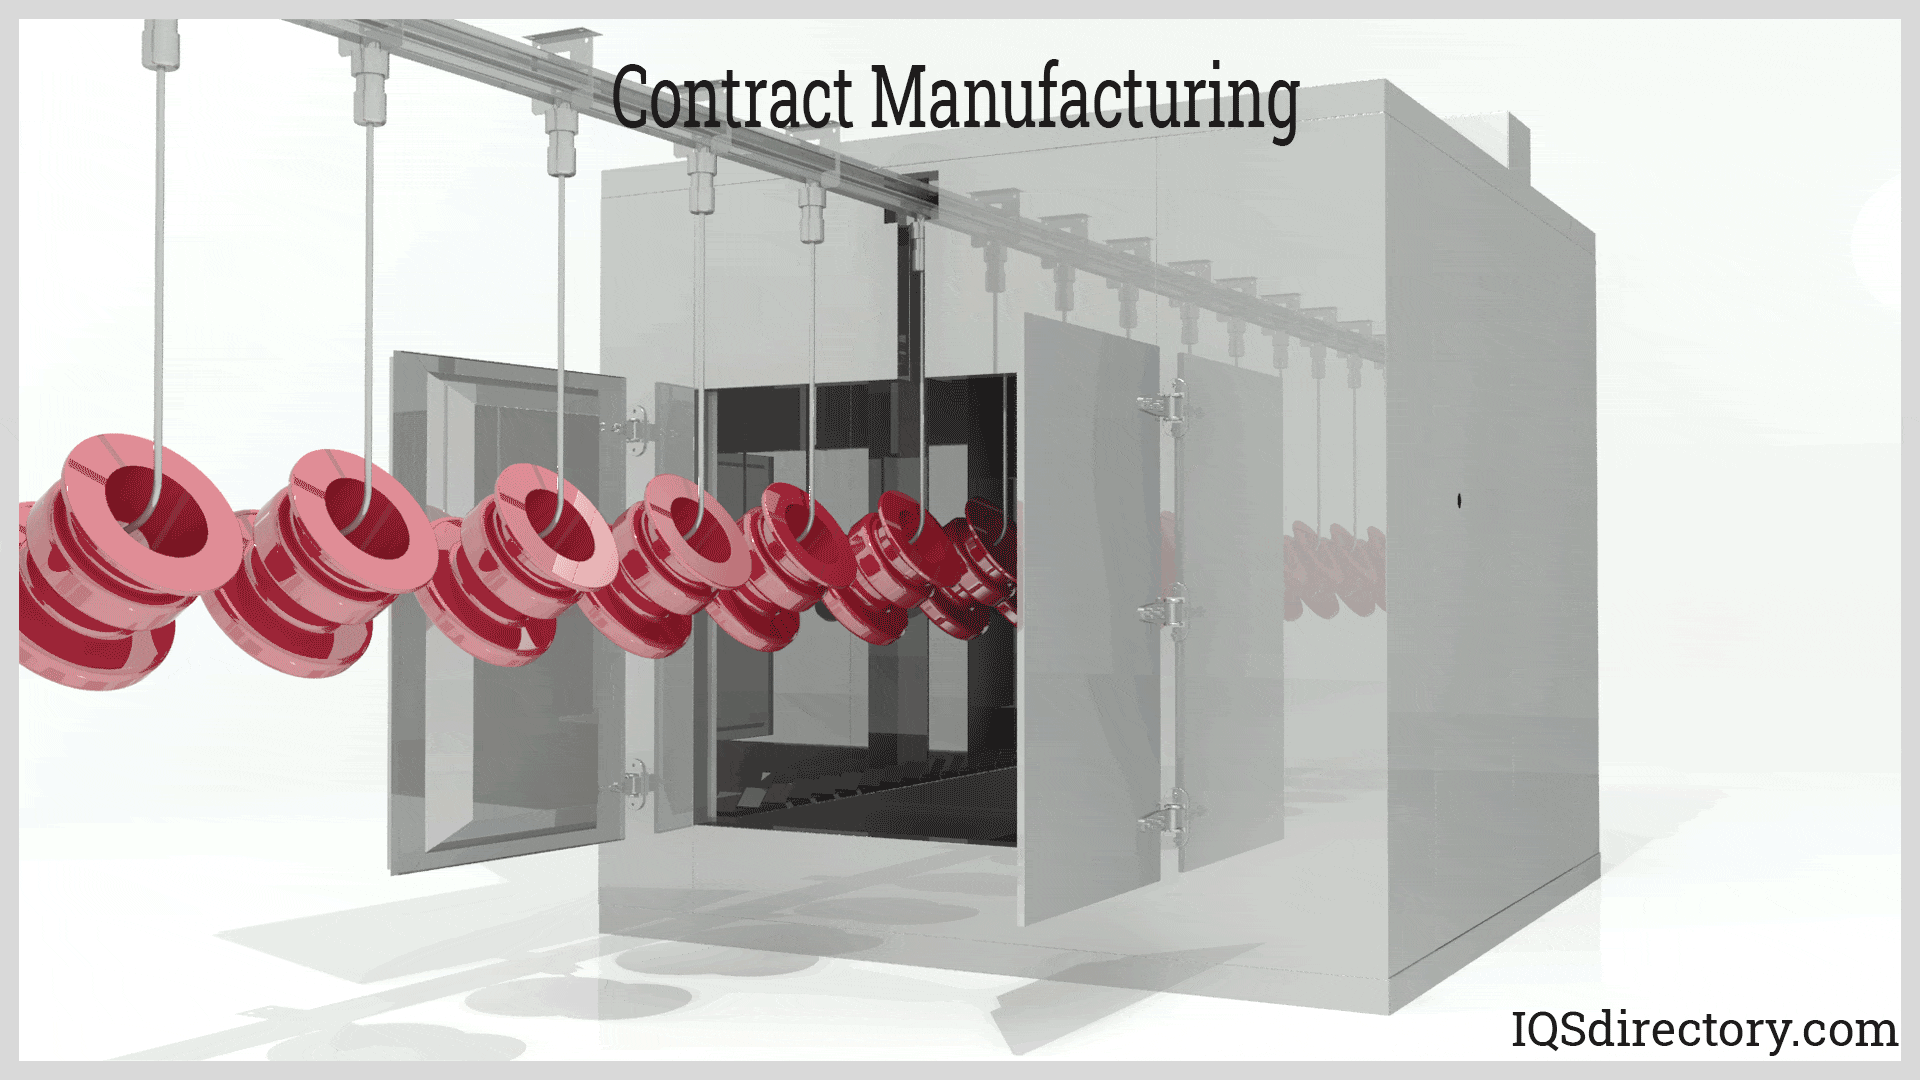 Contract Manufacturing Animation